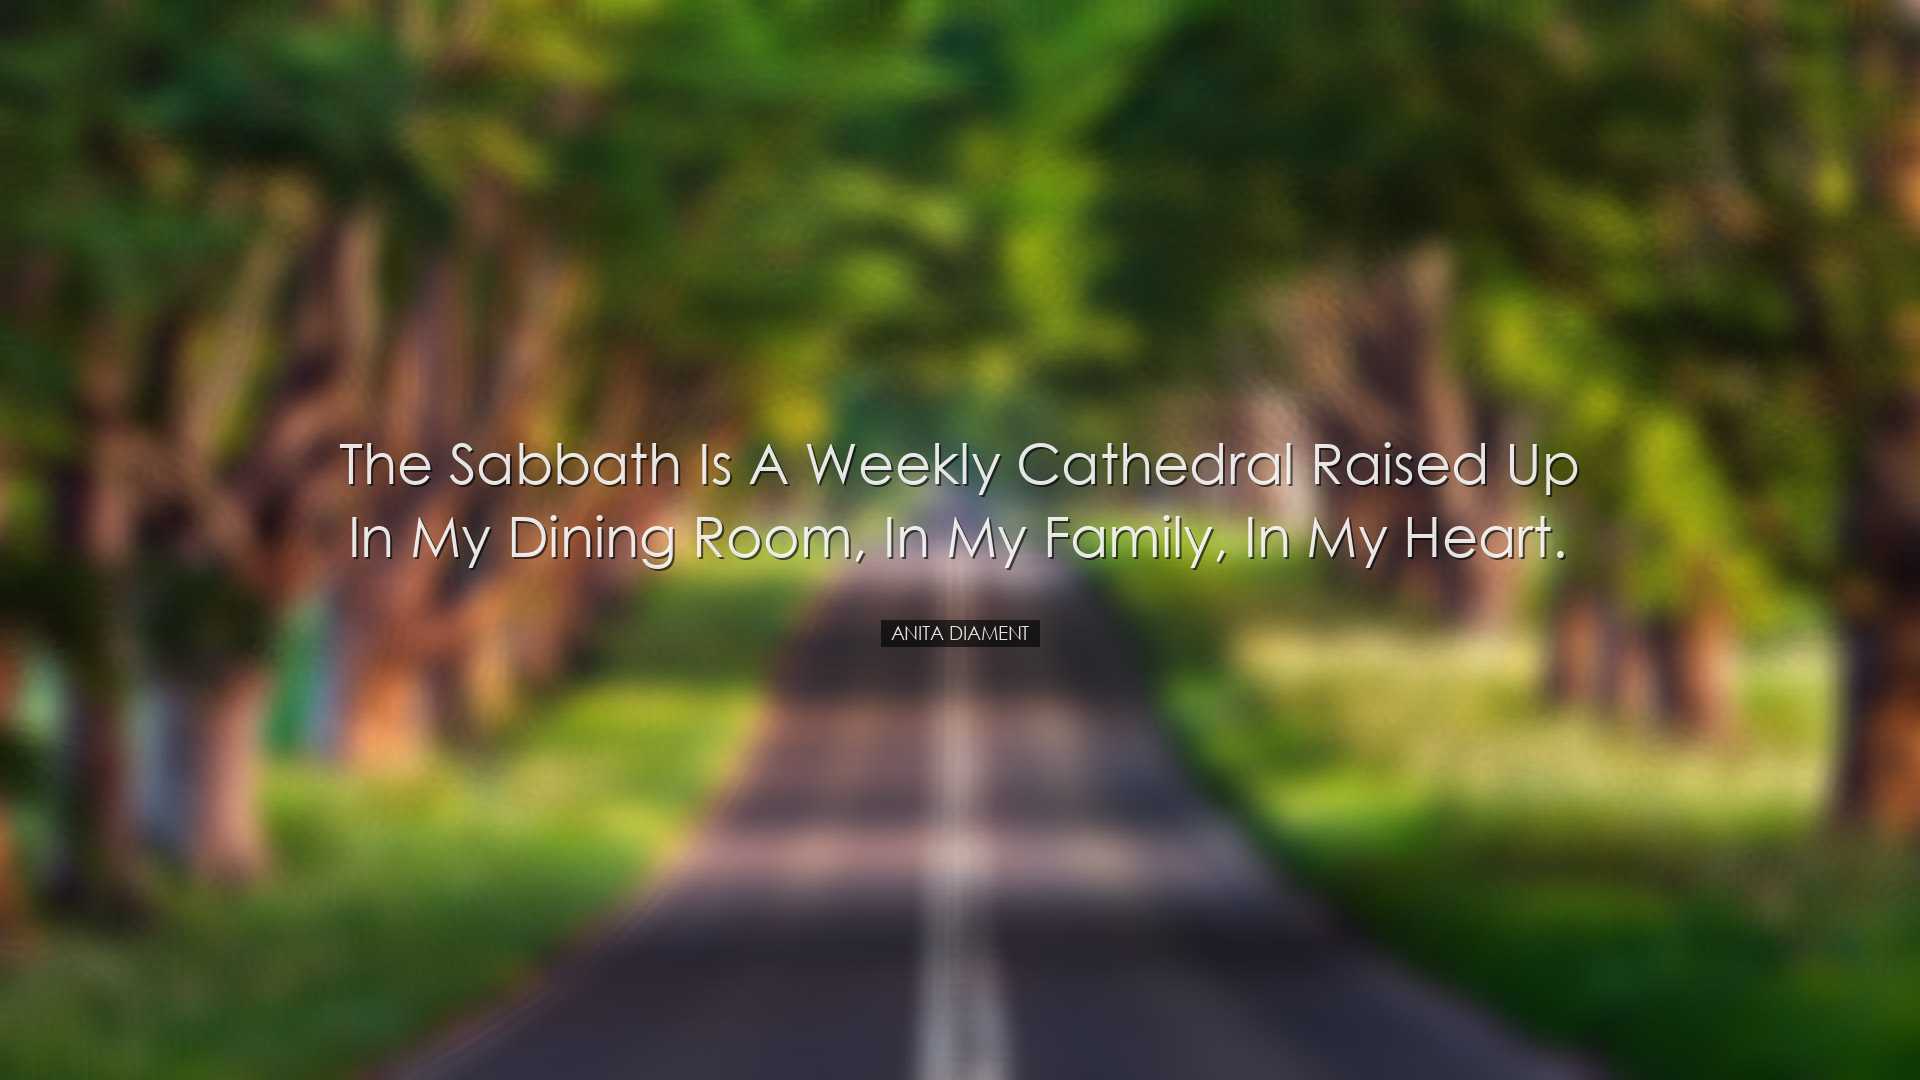 The Sabbath is a weekly cathedral raised up in my dining room, in